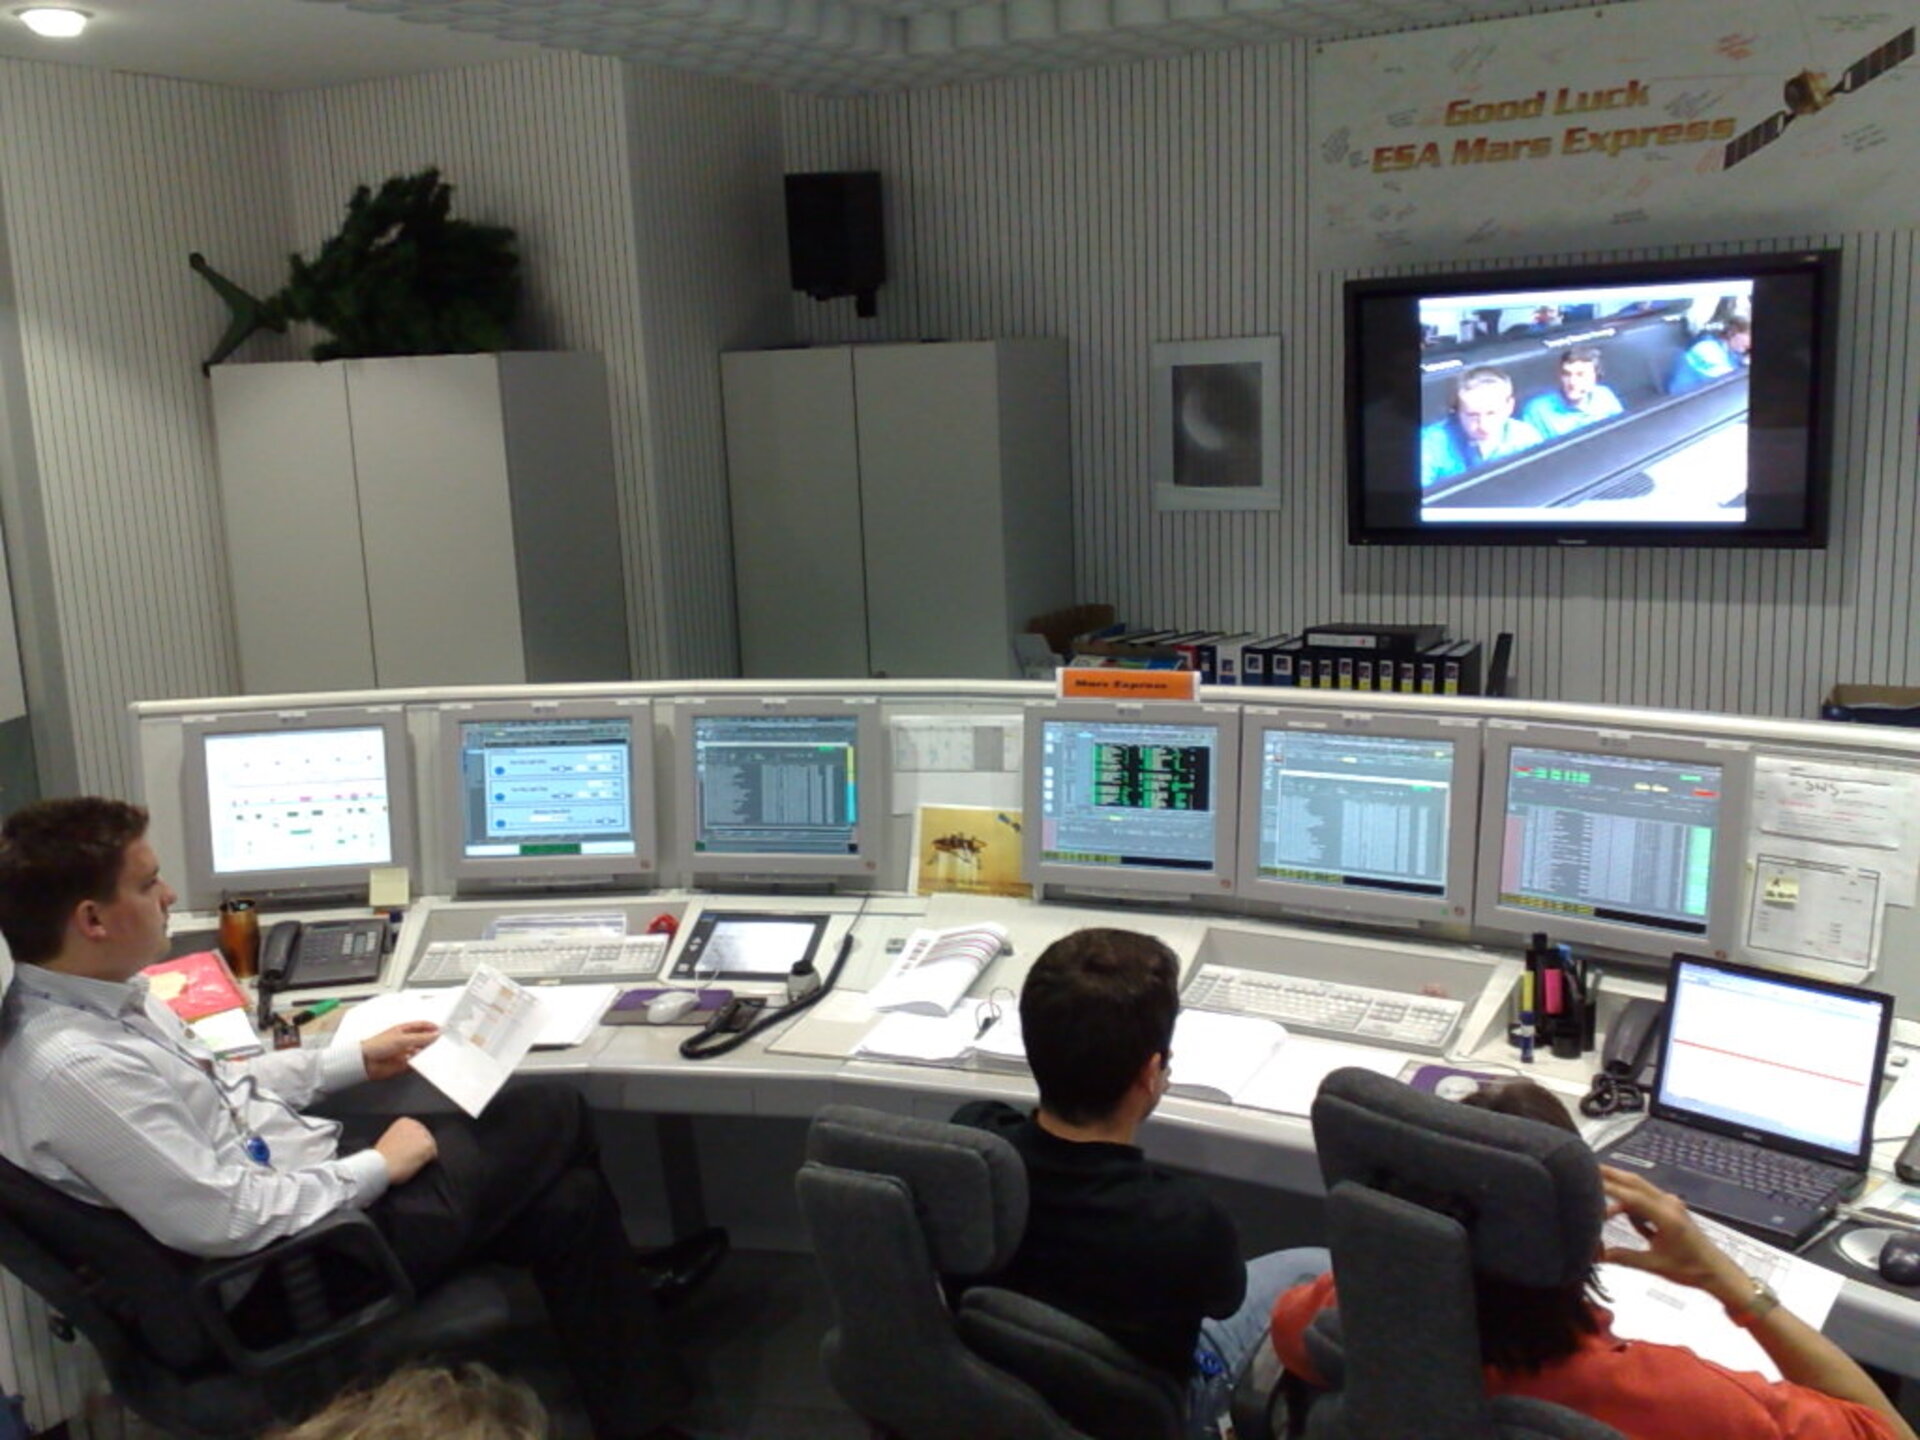 Mars Express Dedicated Control Room during Phoenix EDL